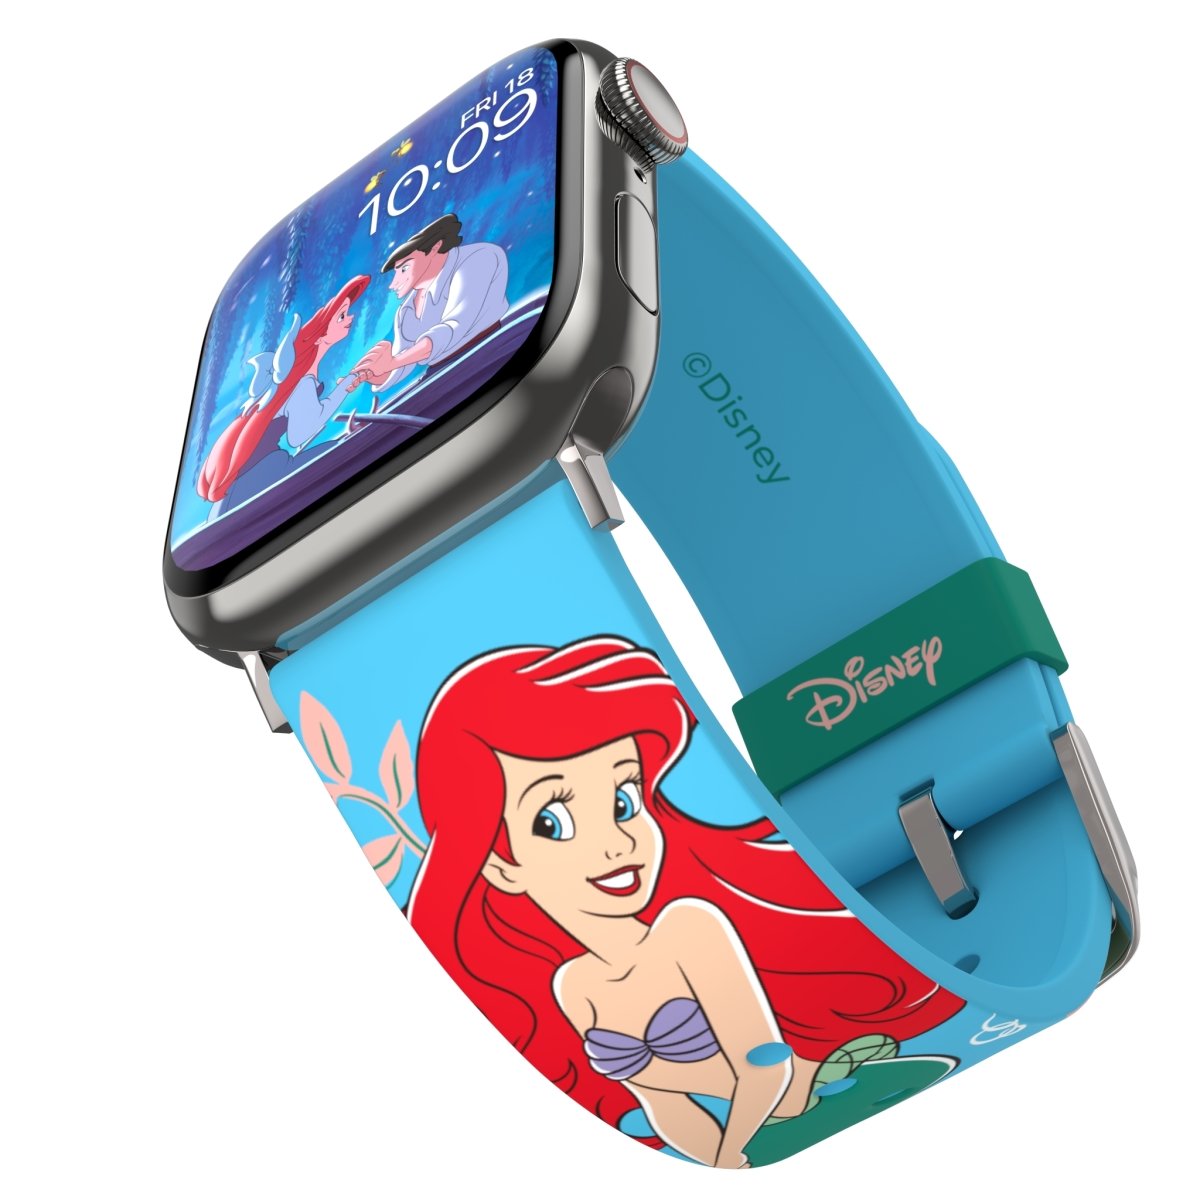  Hepsun Stitch Art Bands Compatible with Samsung Galaxy